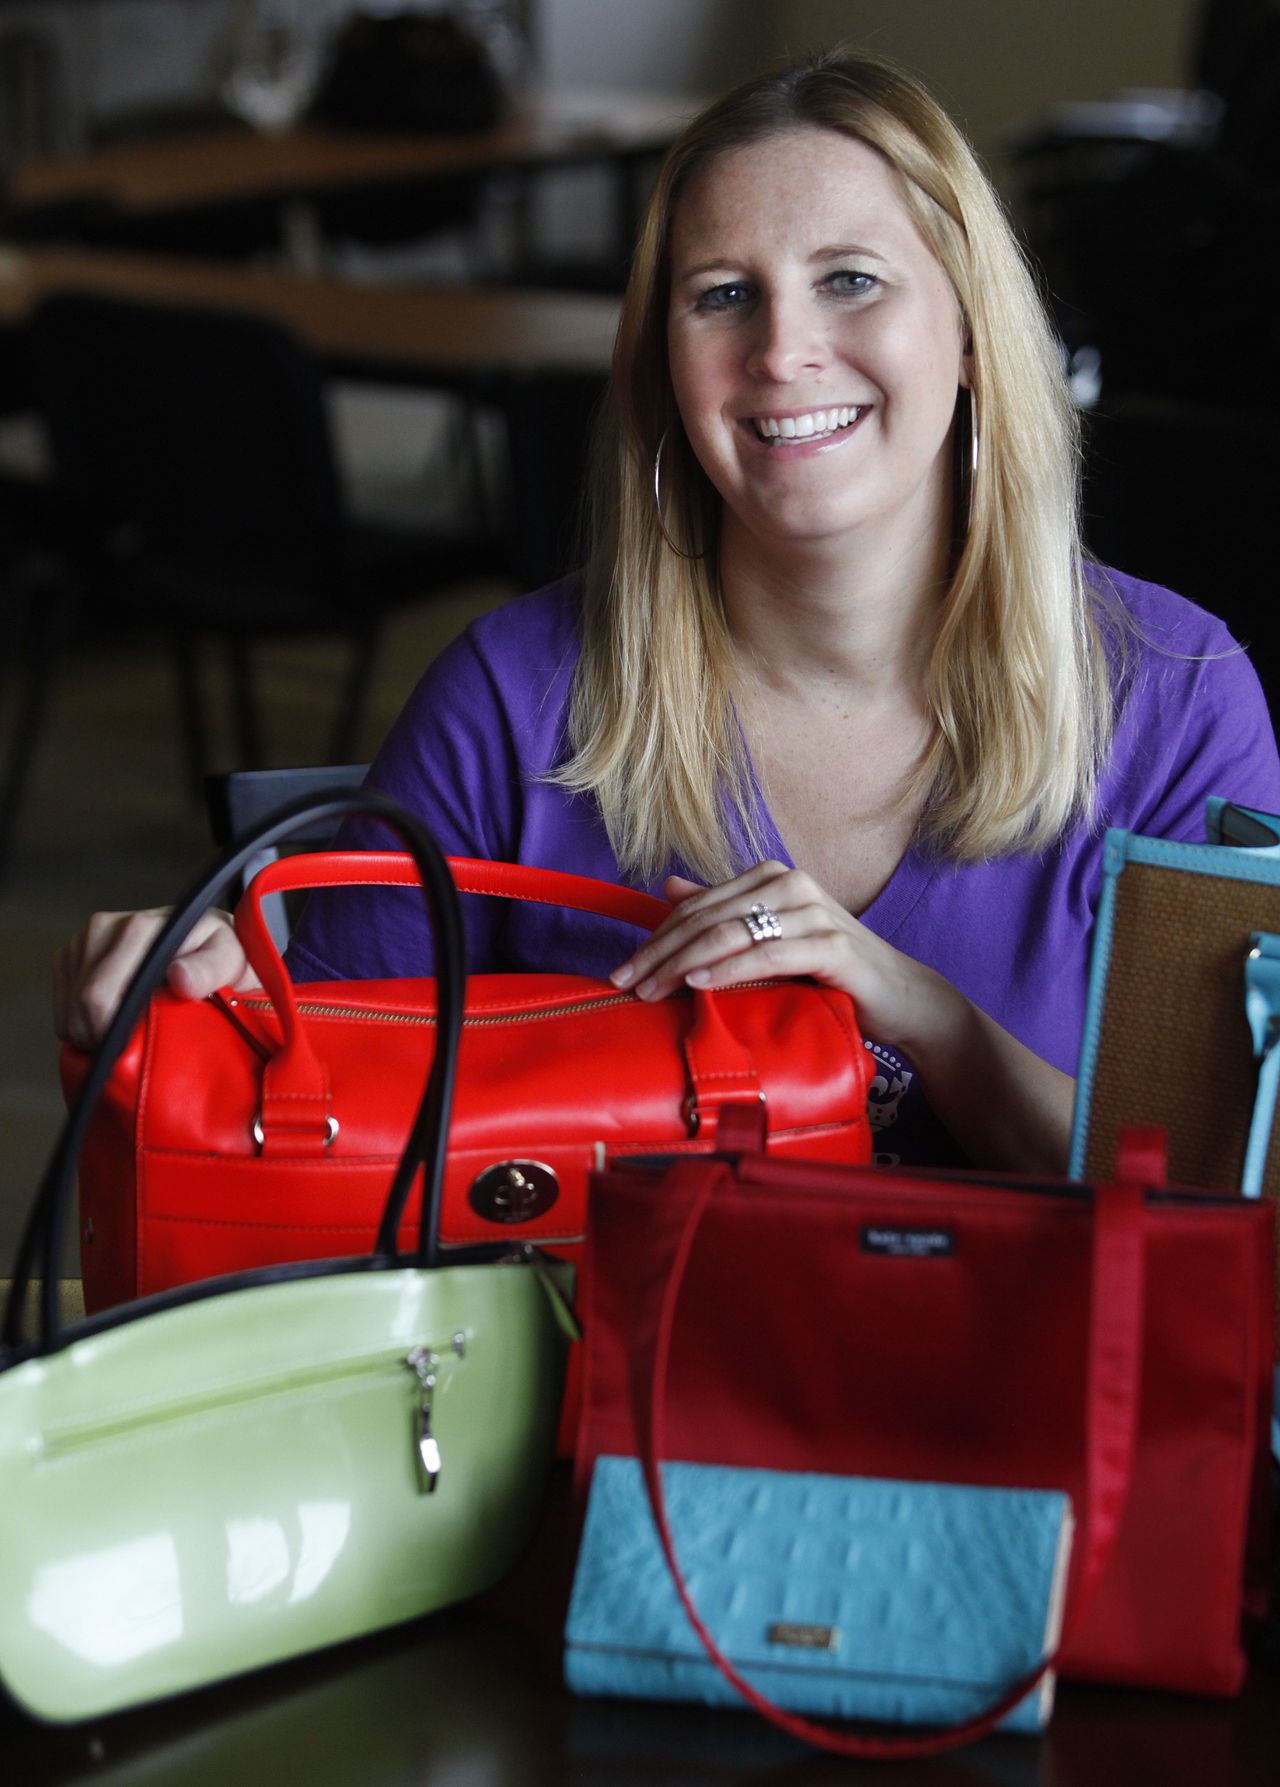 Stephanie Civey, events and marketing coordinator for Domestic Violence Services, poses with purses up for auction at a prior Domestic Violence luncheon fundraiser.